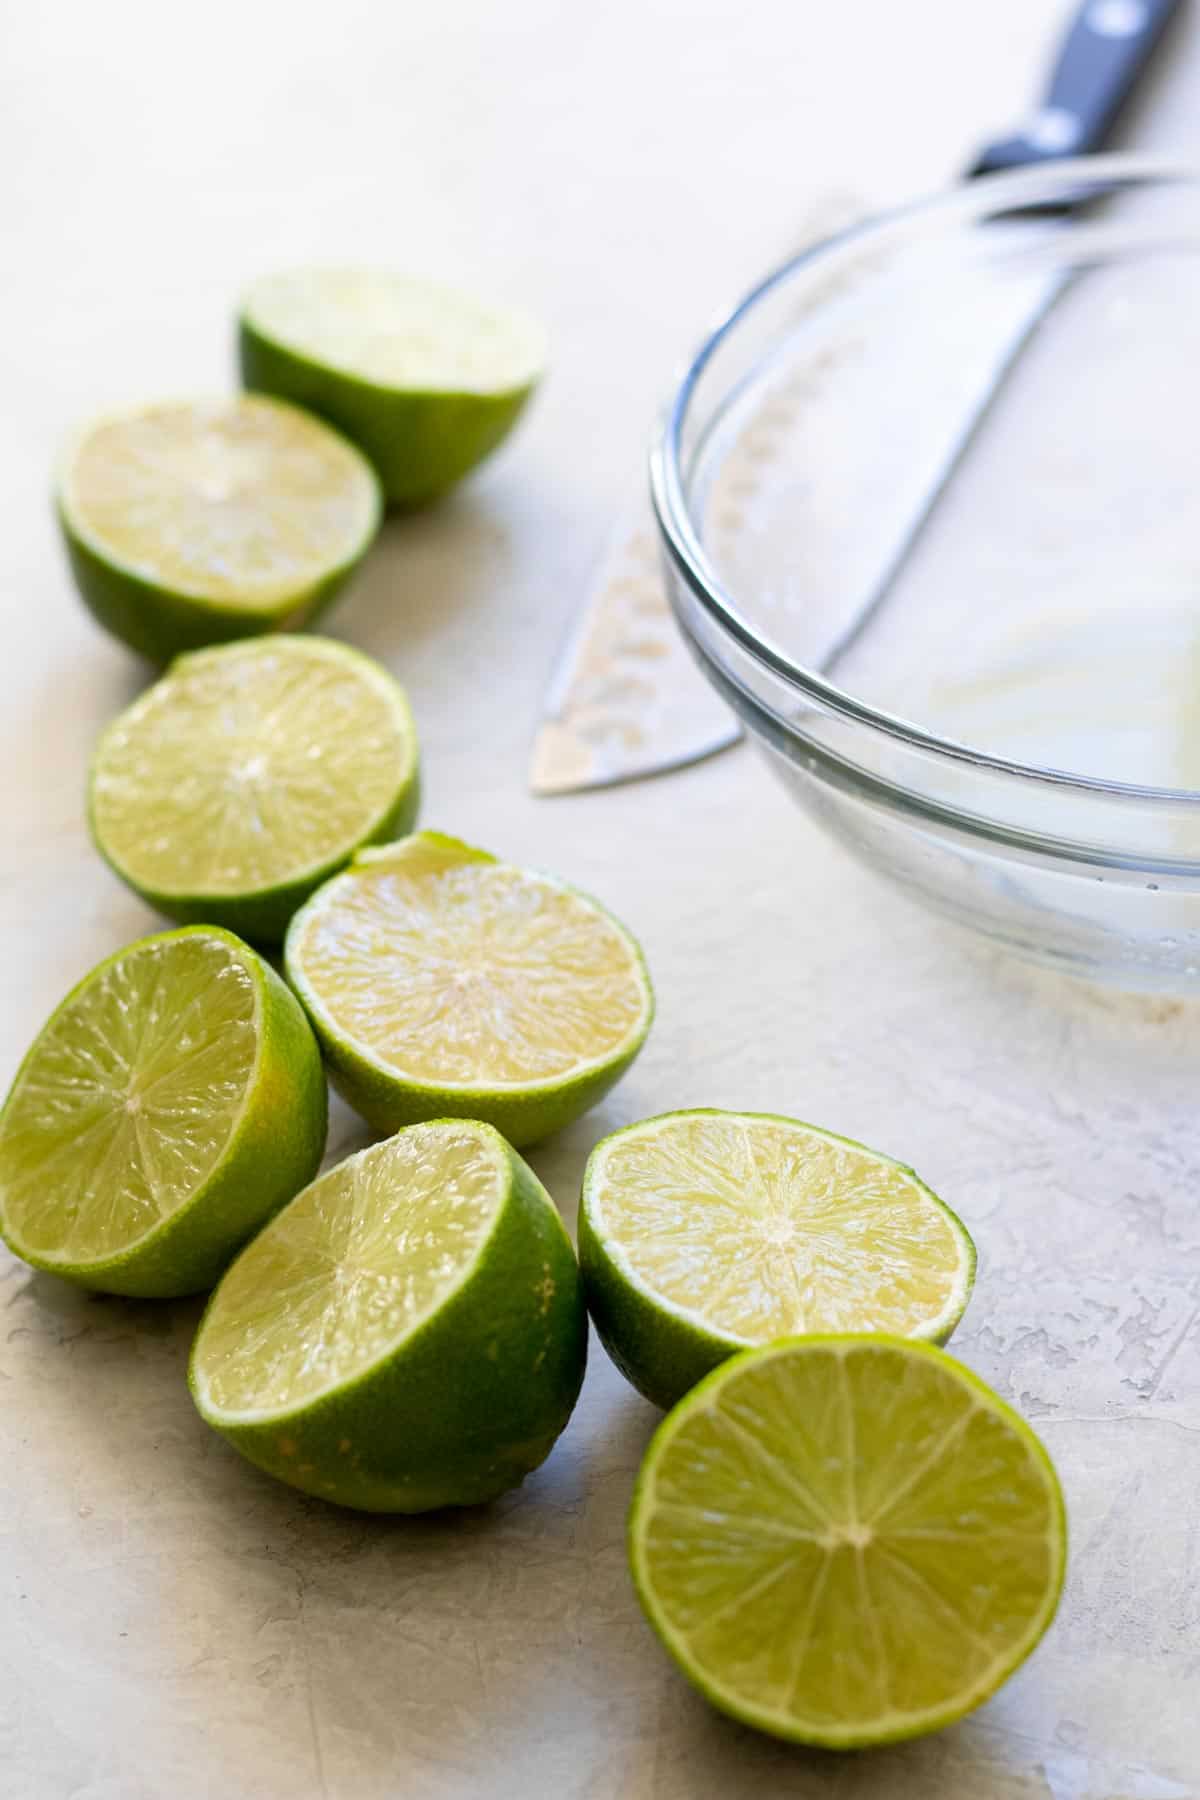 Limes cut in half near glass bowl with knife.